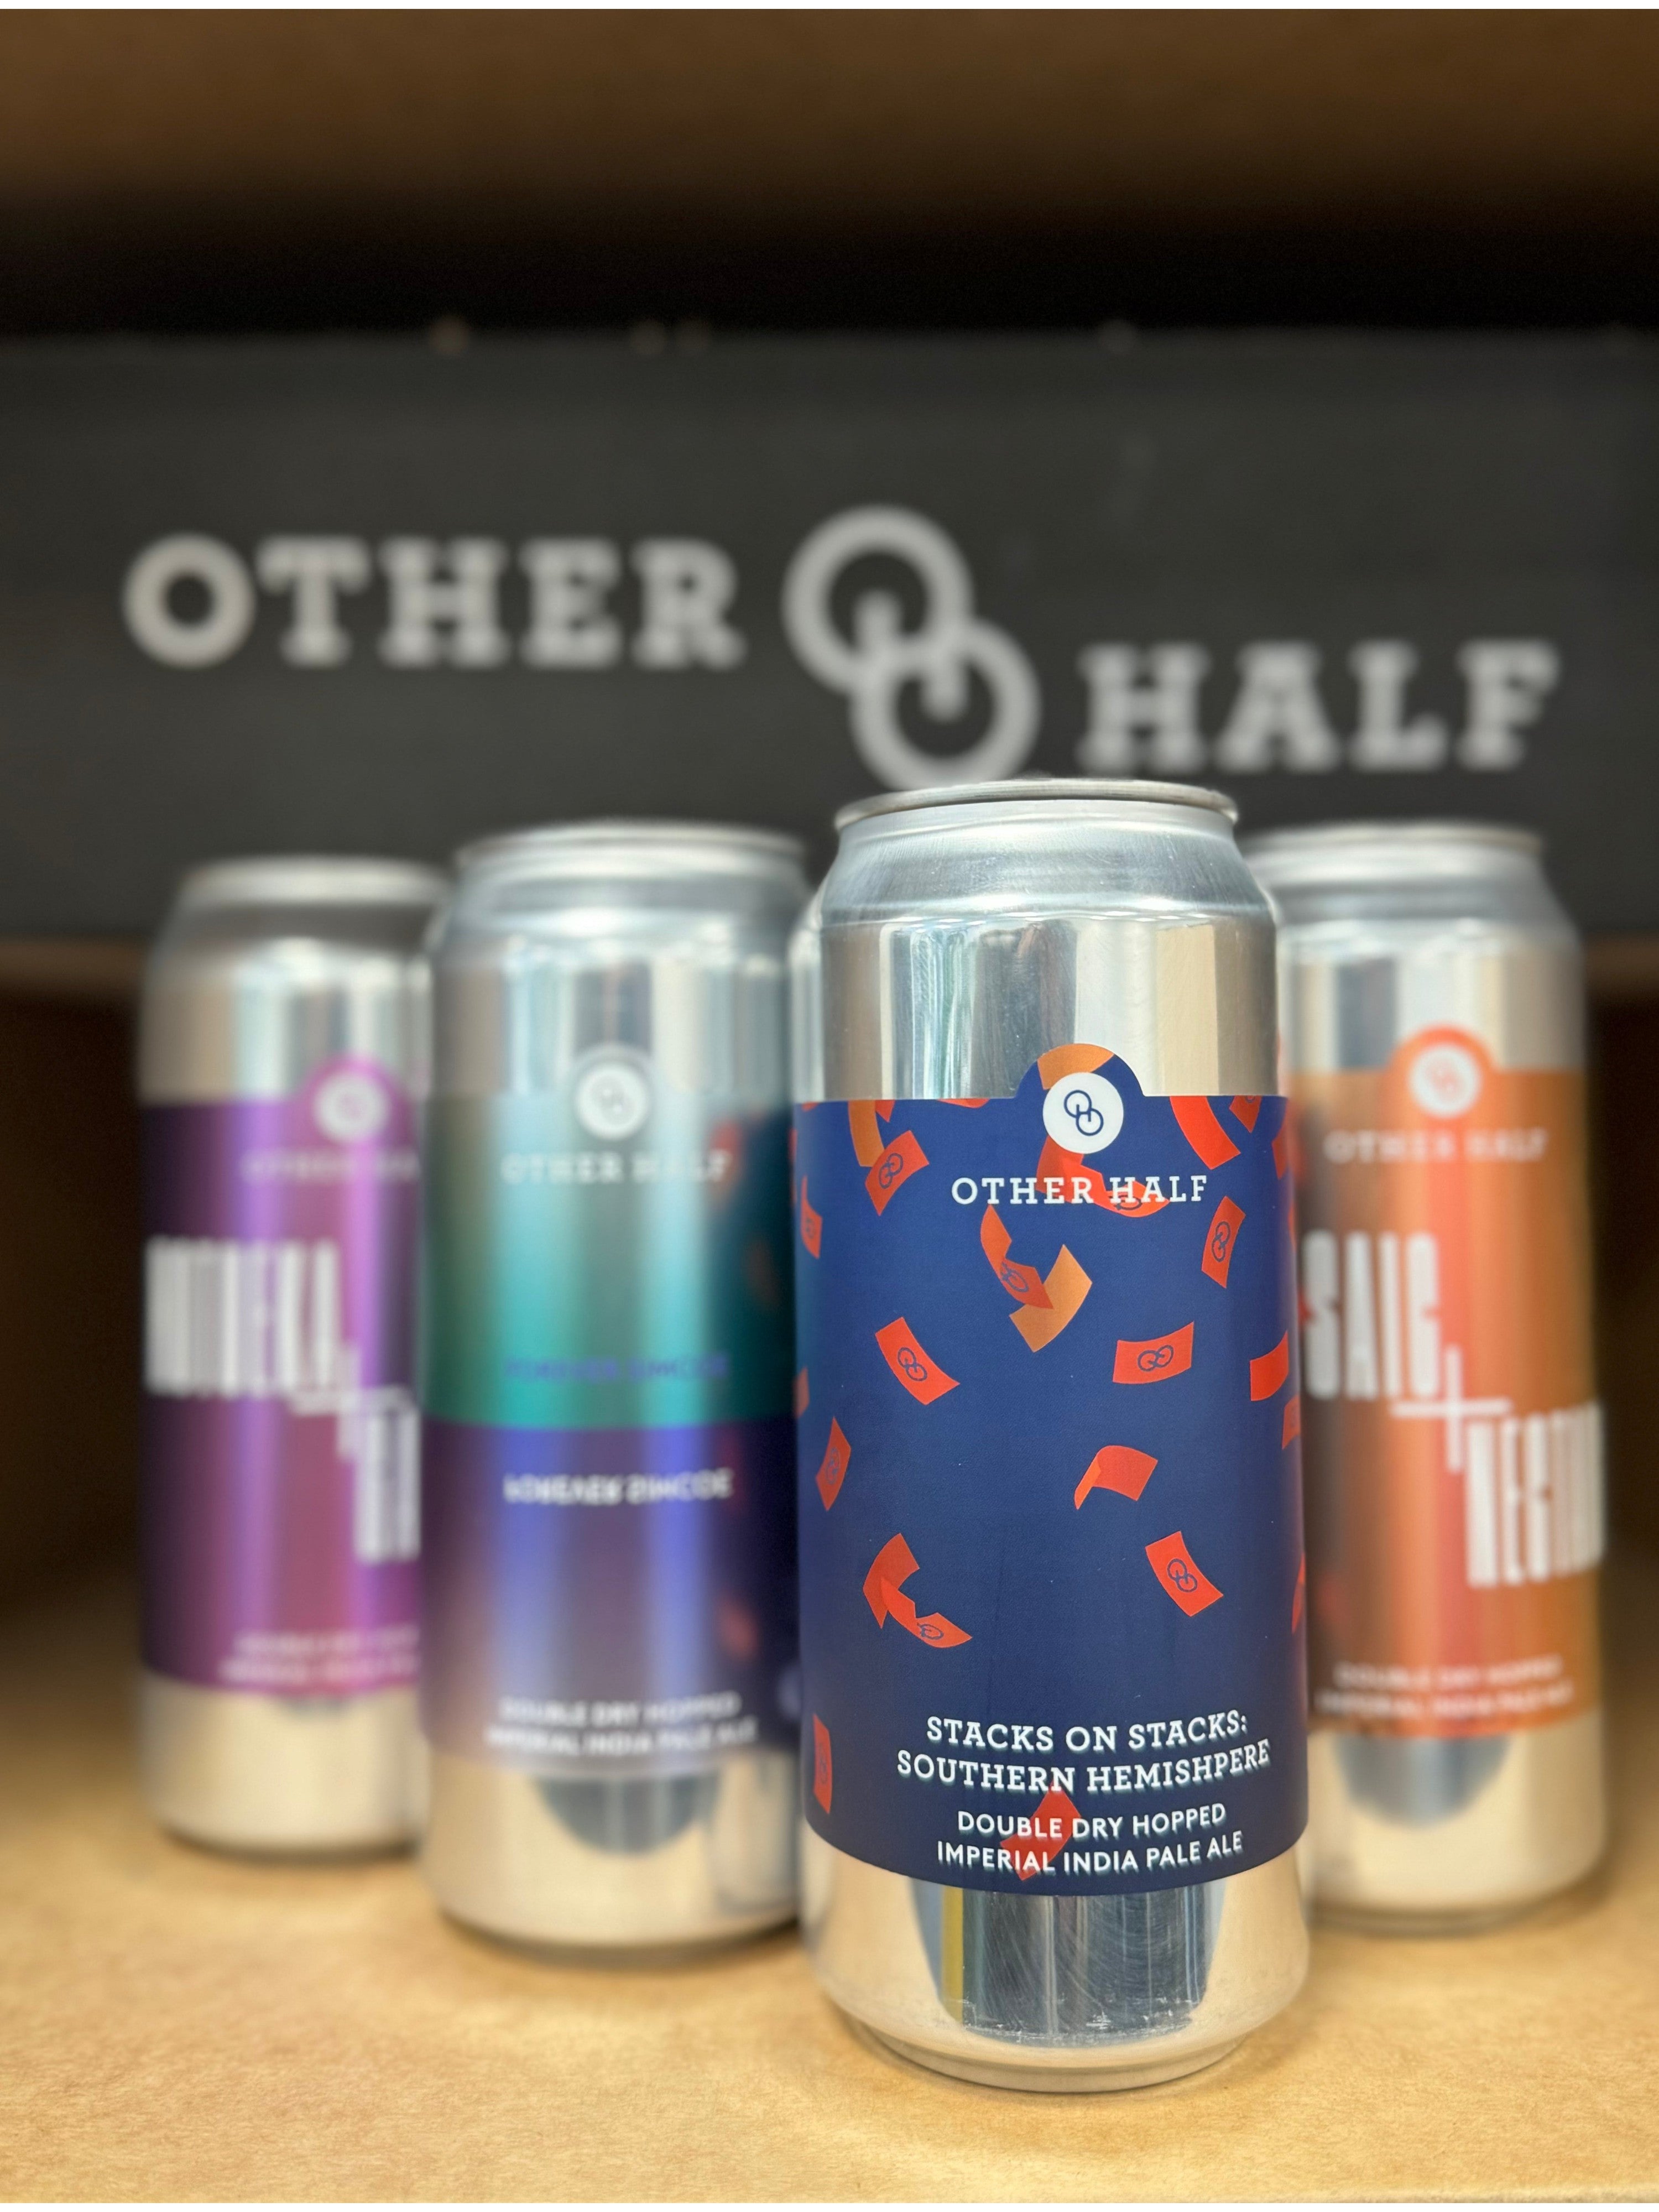 -Other Half- Other Half 🚀 Take Off Set 1-Packs & Cases- Only @ Beer Republic - The best online beer store for American & Canadian craft beer - Buy beer online from the USA and Canada - Bier online kopen - Amerikaans bier kopen - Craft beer store - Craft beer kopen - Amerikanisch bier kaufen - Bier online kaufen - Acheter biere online - IPA - Stout - Porter - New England IPA - Hazy IPA - Imperial Stout - Barrel Aged - Barrel Aged Imperial Stout - Brown - Dark beer - Blond - Blonde - Pilsner - Lager - Wheat -